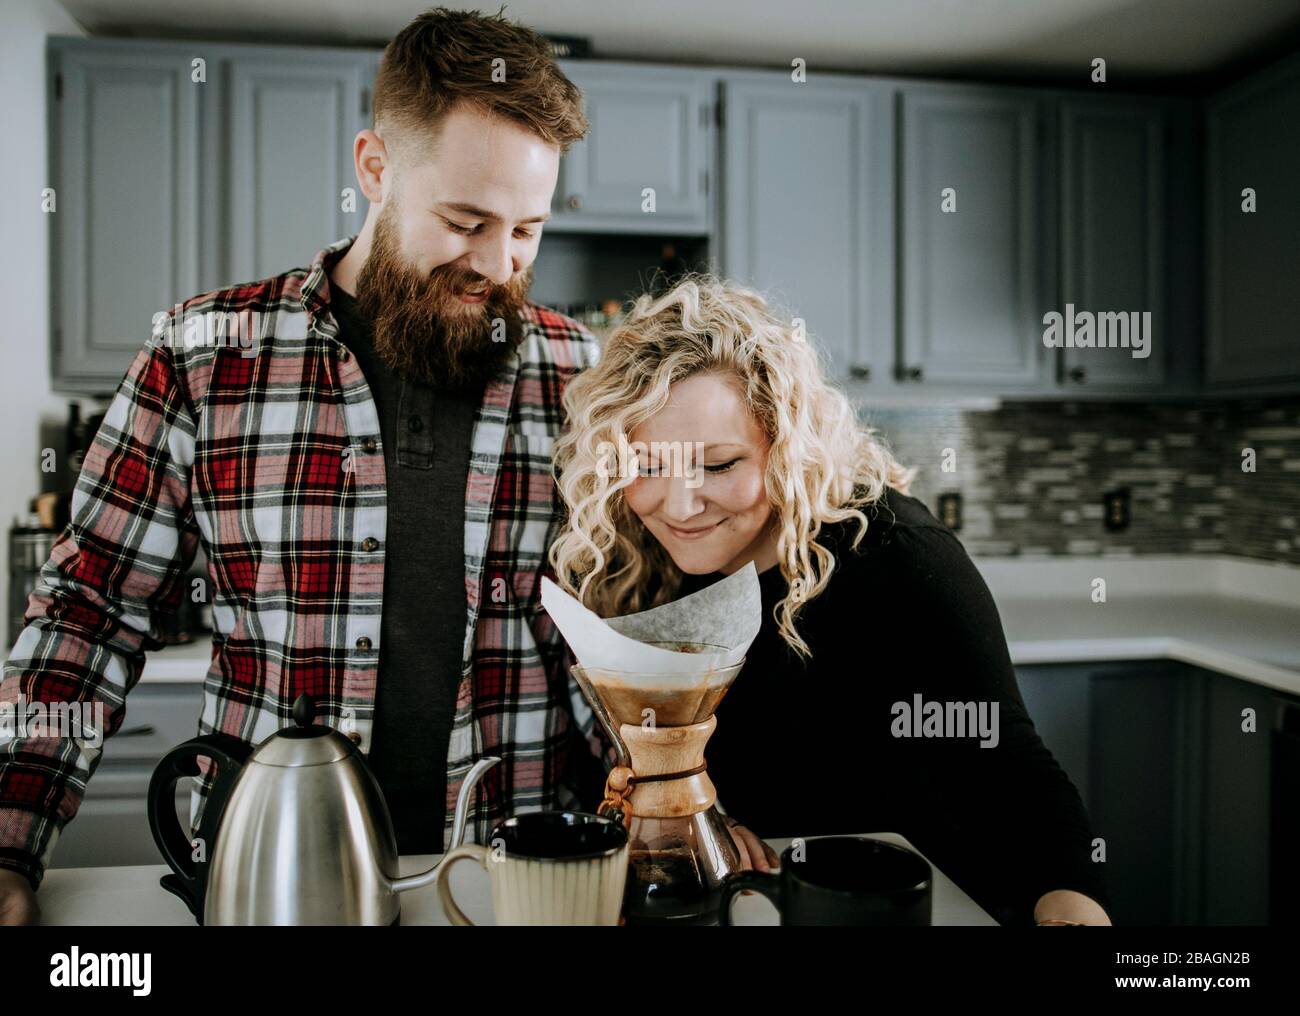 young female smells morning coffee while husband with beard looks on Stock Photo